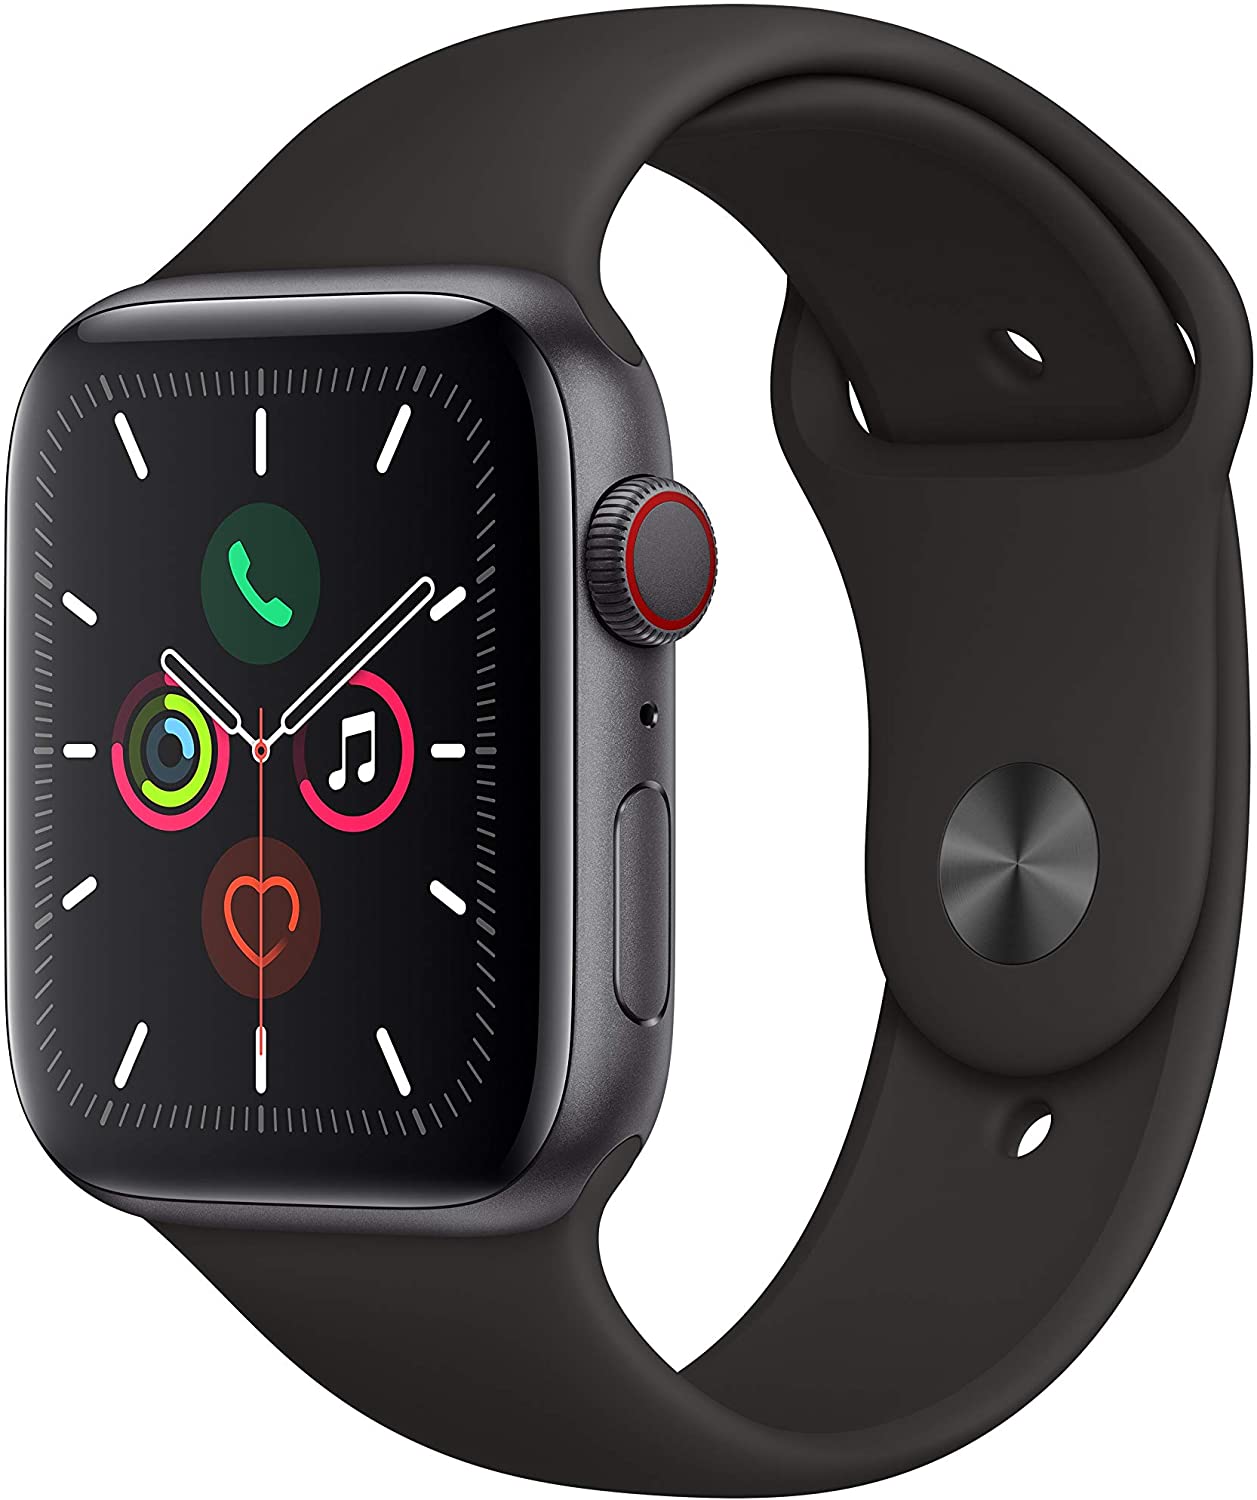 Apple Watch Series 5 (GPS + Cellular, 40mm) - Space Gray Aluminum Case with Black Sport Band